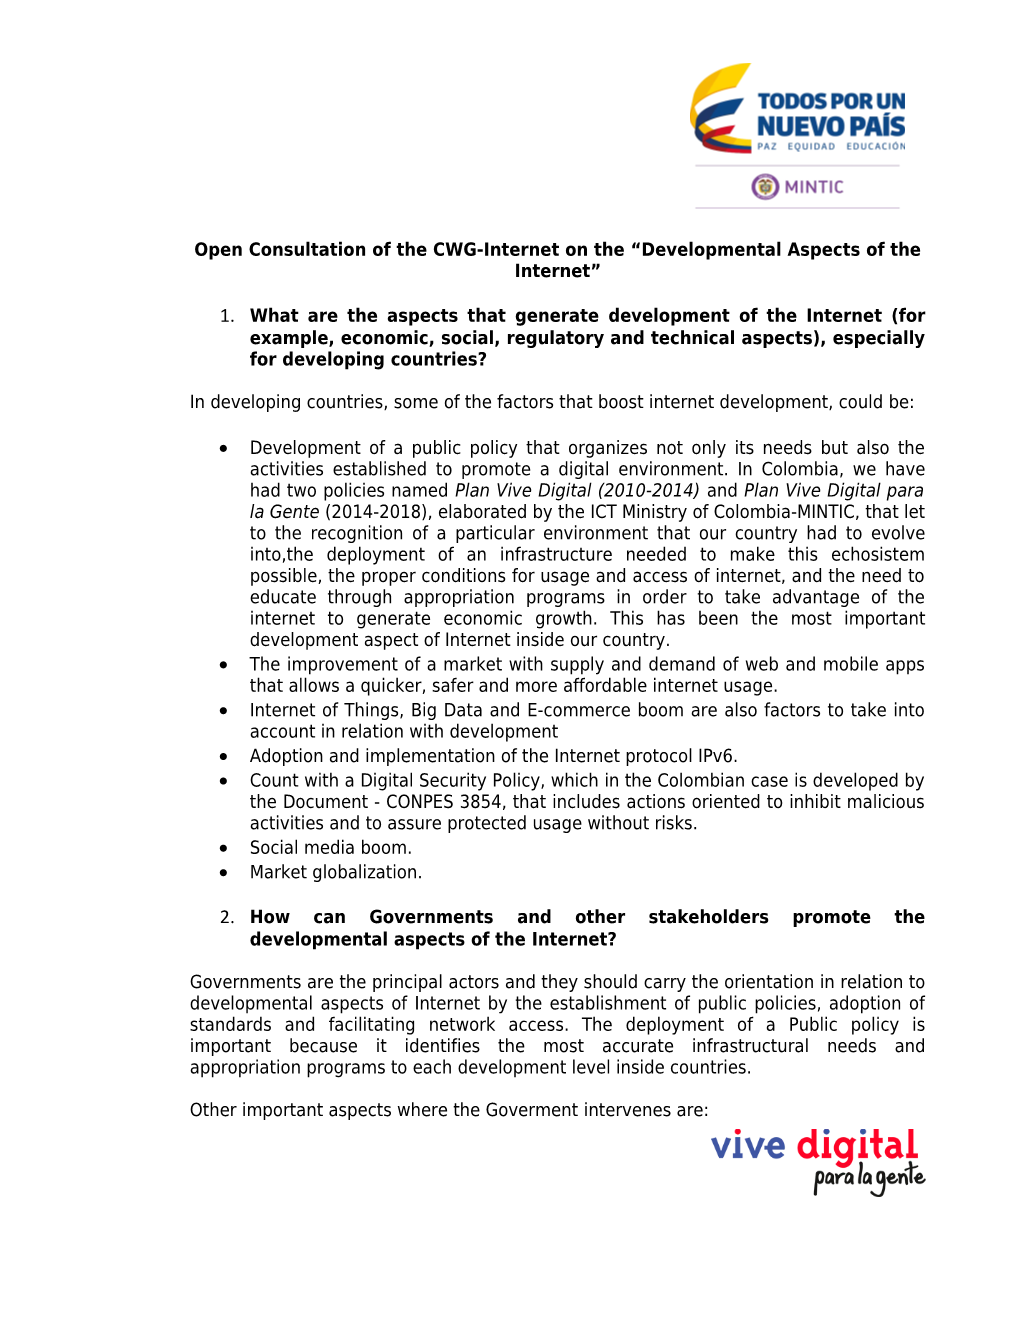 Open Consultation of the CWG-Internet on the Developmental Aspects of the Internet